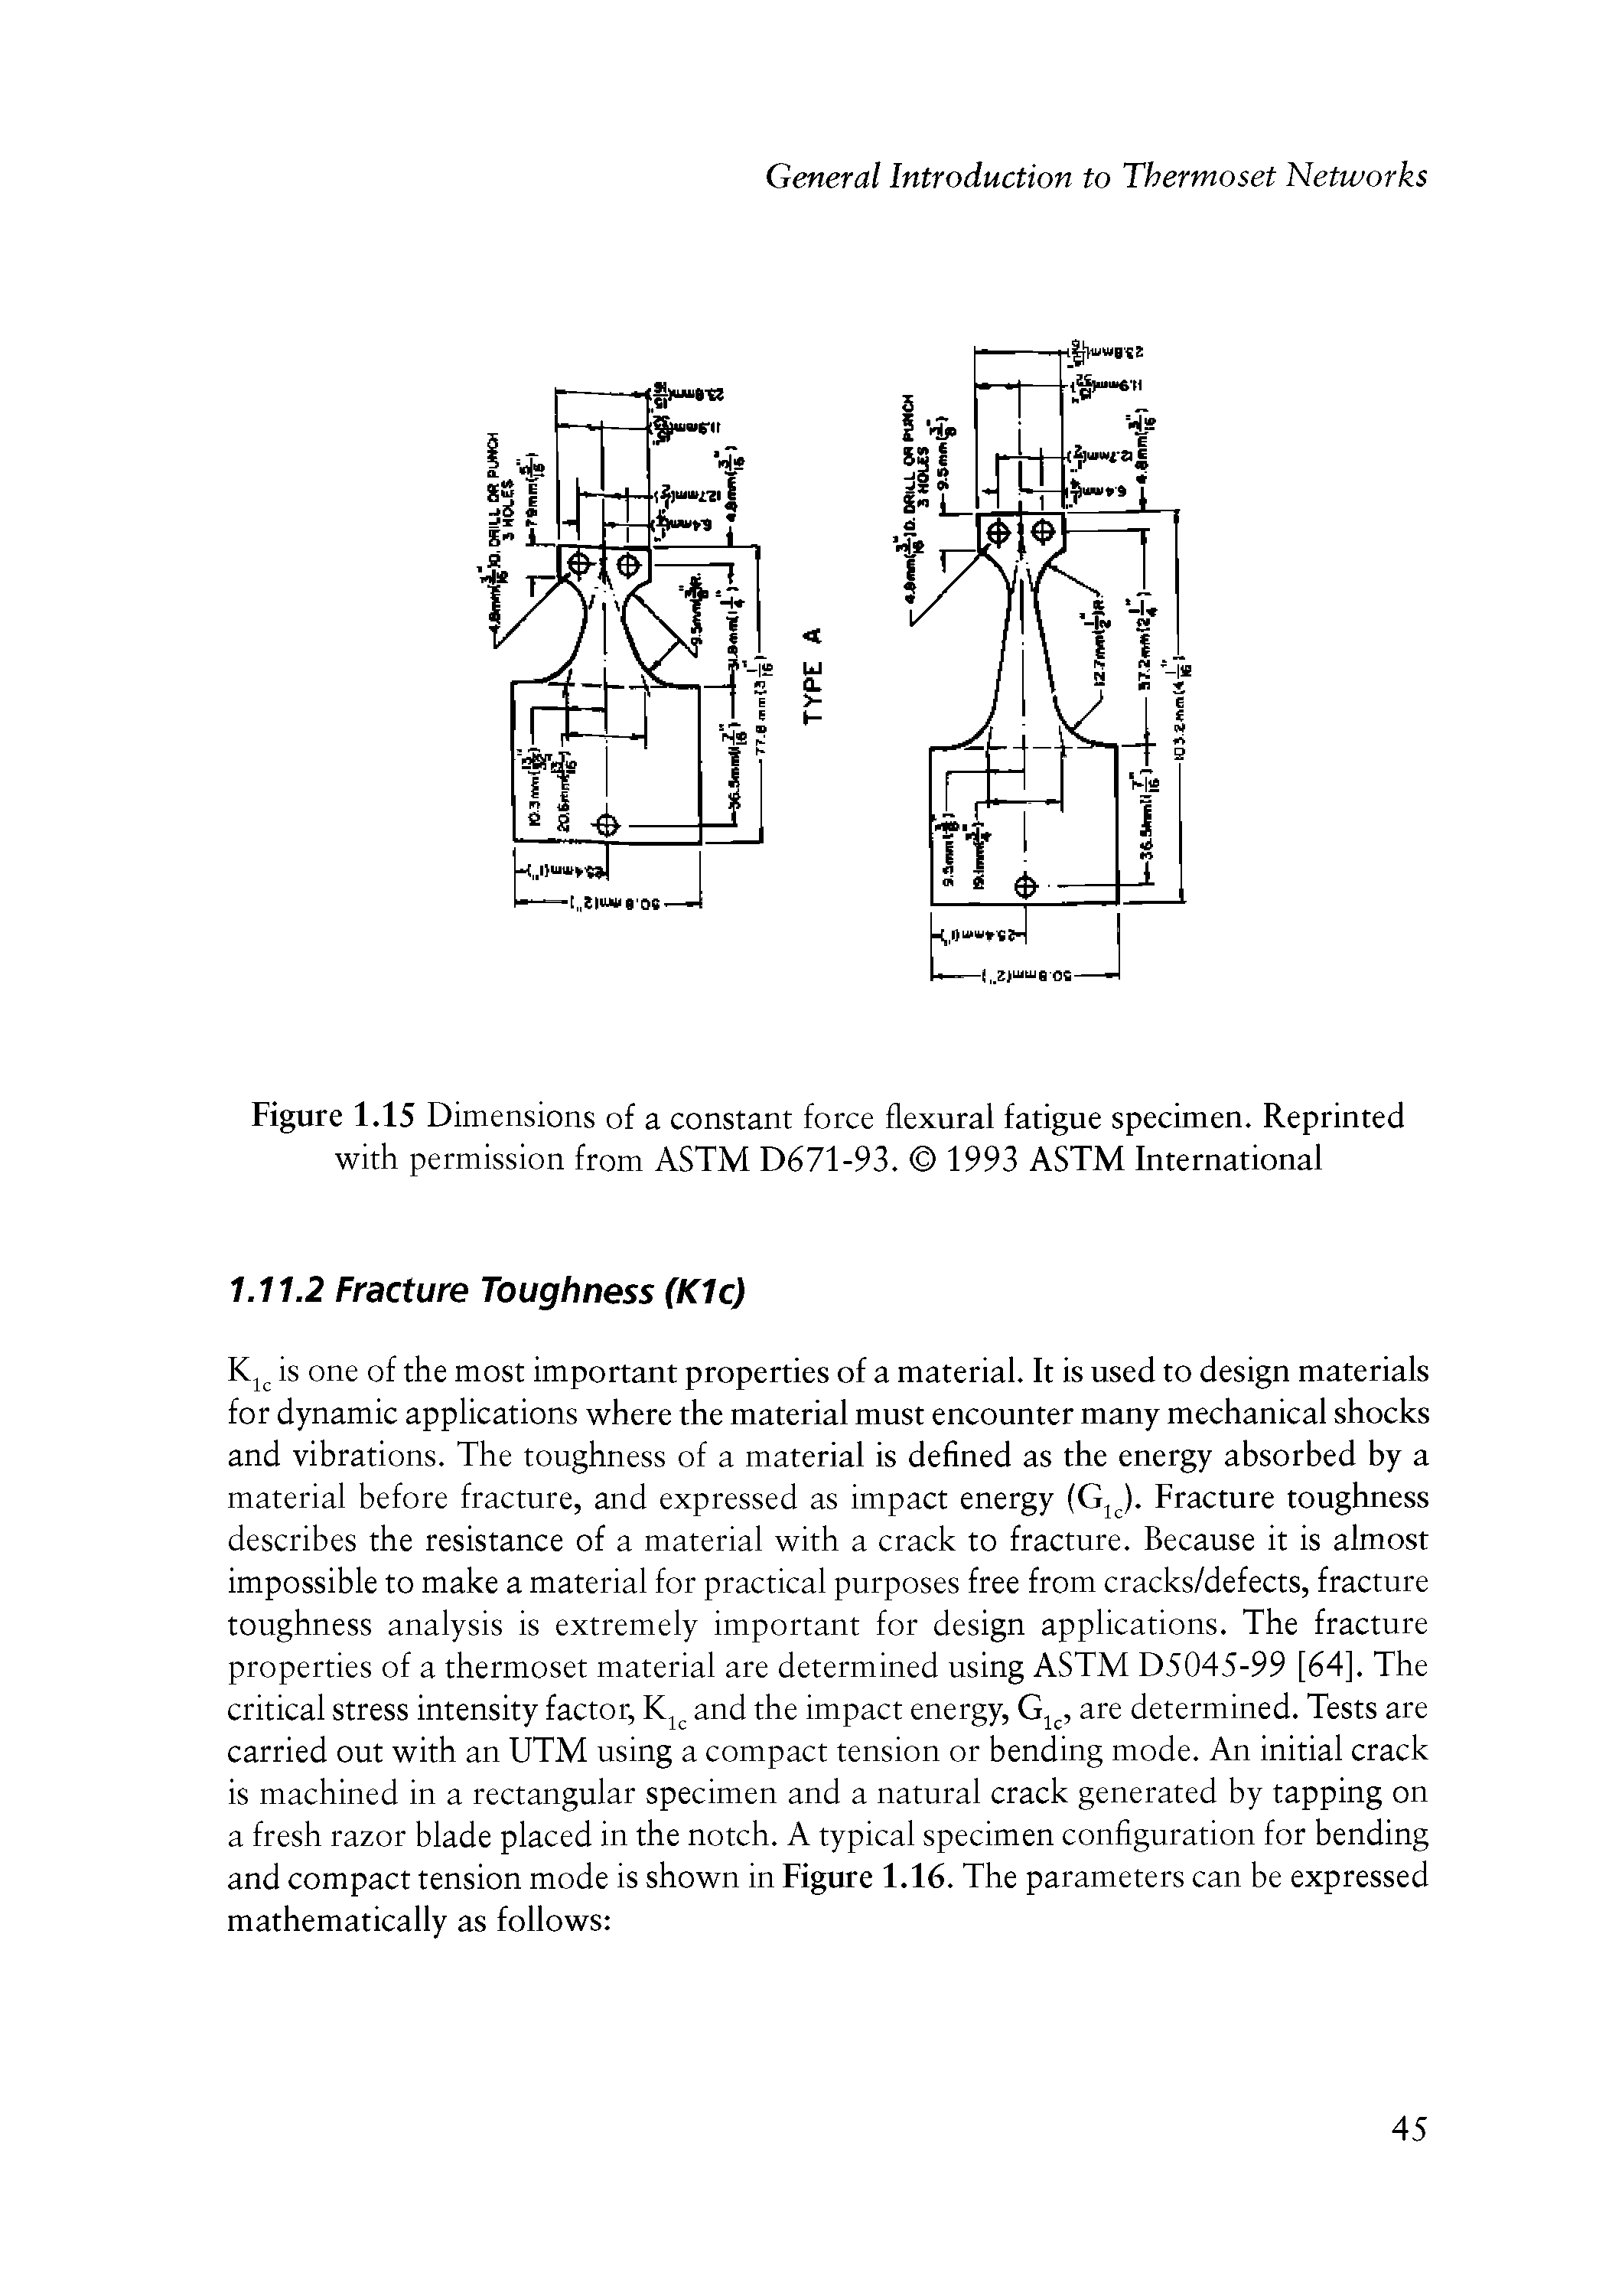 Figure 1.15 Dimensions of a constant force flexural fatigue specimen. Reprinted with permission from ASTM D671-93. 1993 ASTM International...